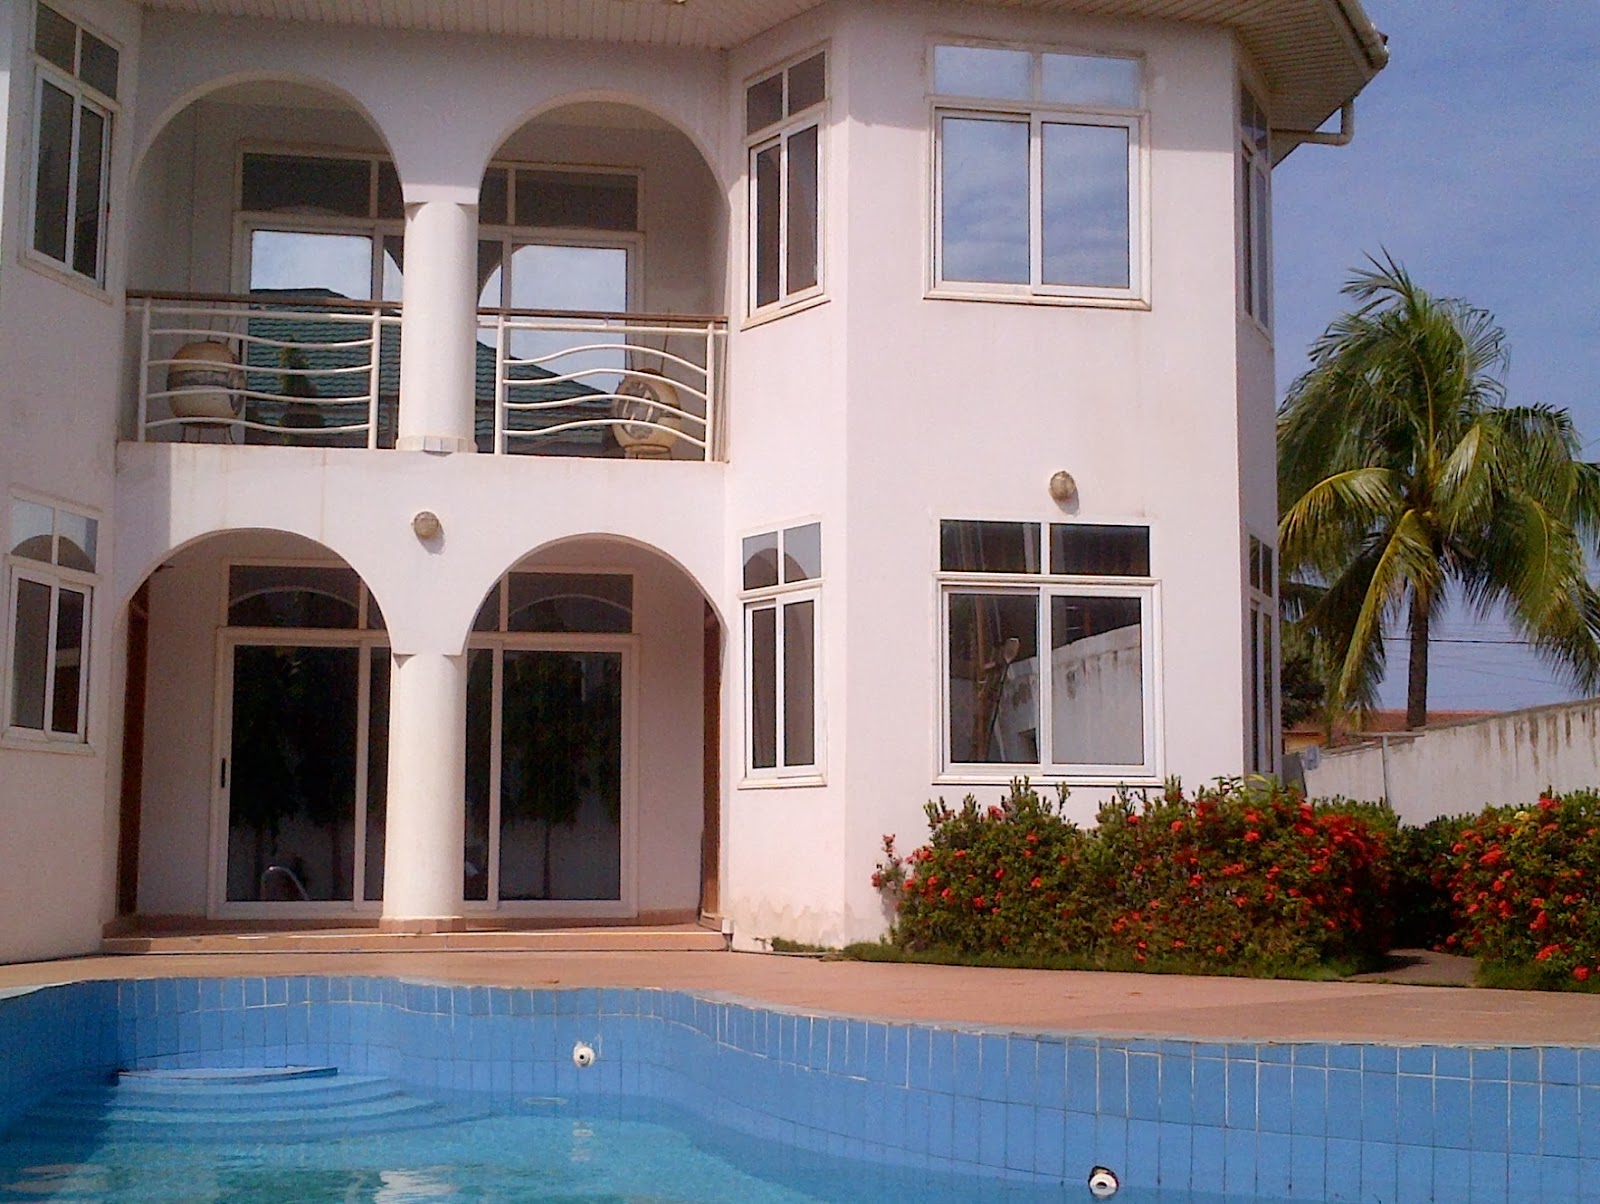  EAST LEGON ACCRA CALL 0241244552 OR CLICK ON THIS LINK FOR FURTHER INFORMATION